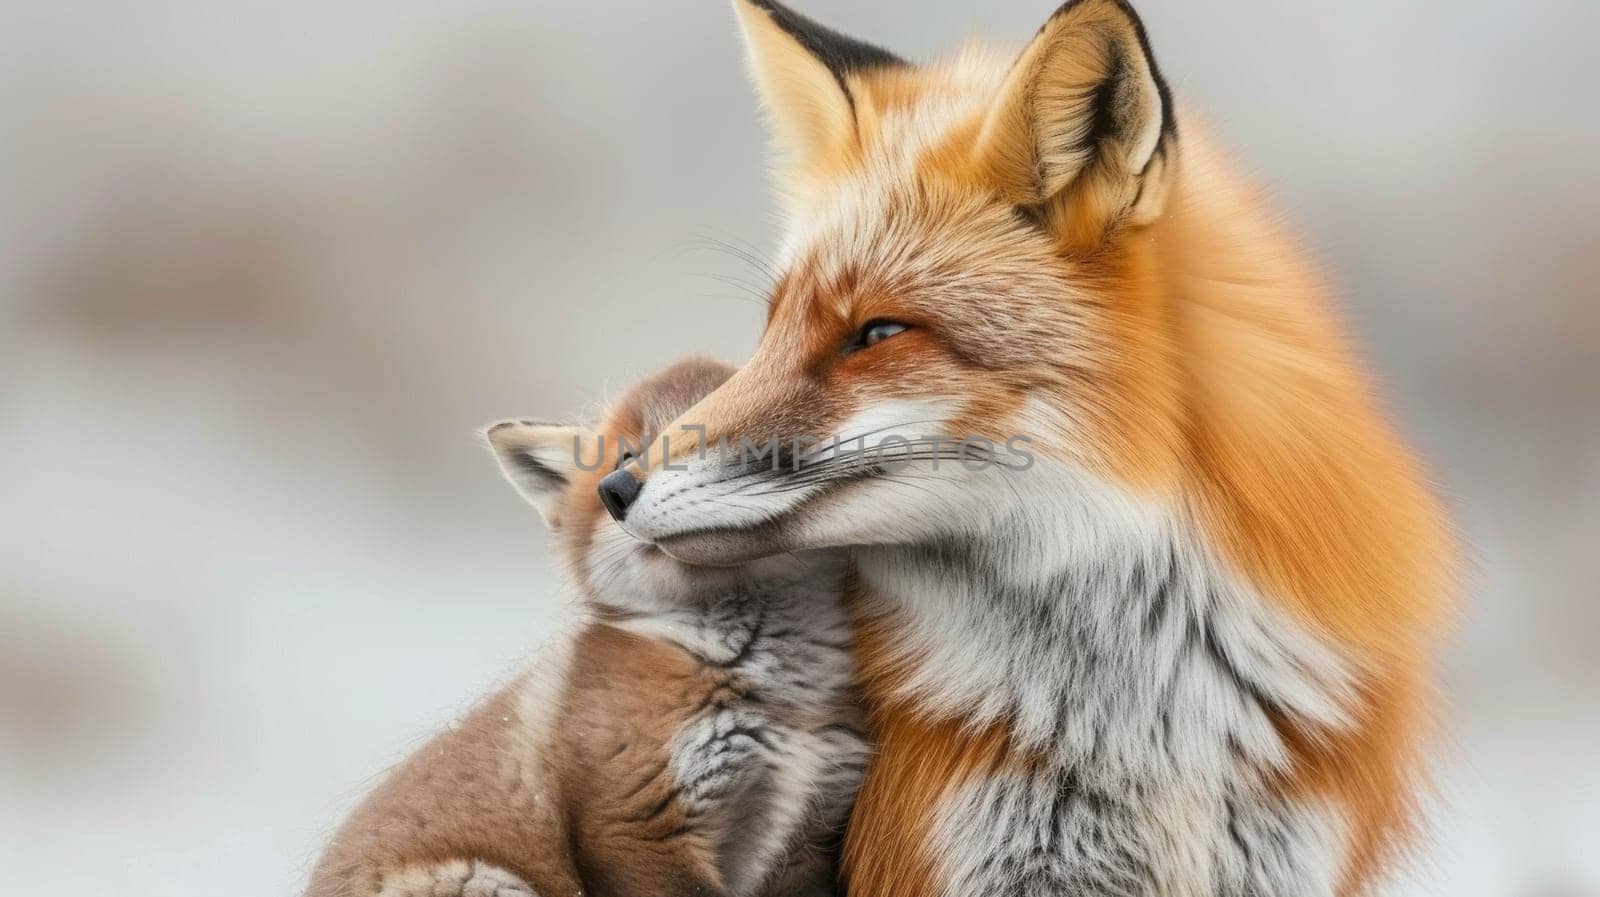 A fox and its cub cuddling together in the snow